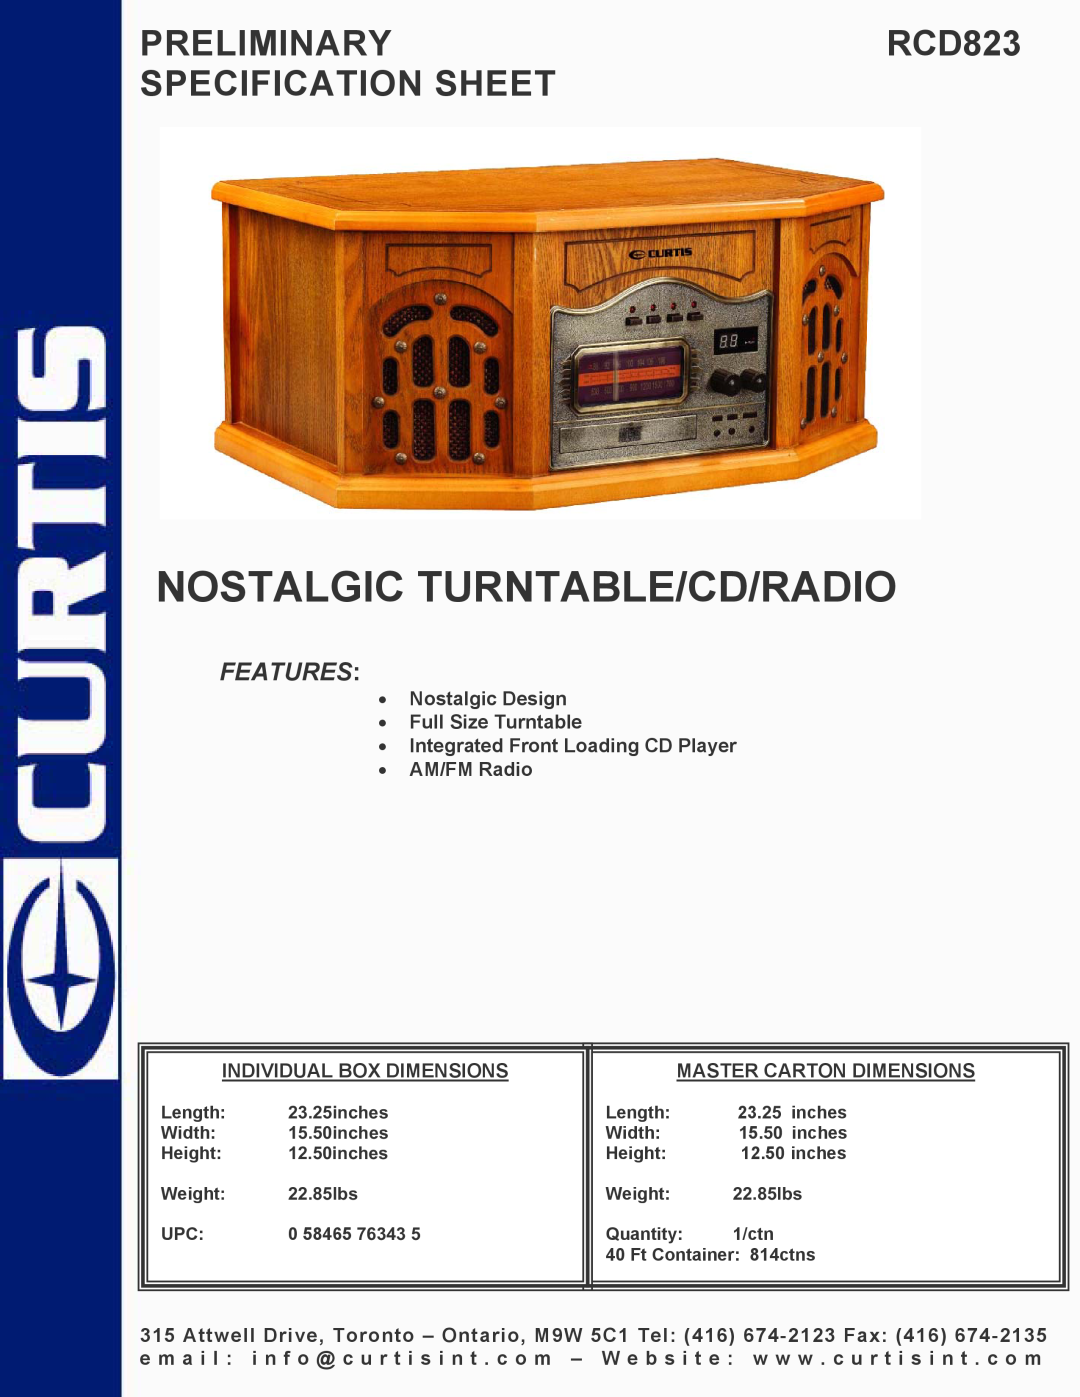 Curtis rcd823 specifications Nostalgic Turntable/Cd/Radio, PRELIMINARYRCD823 SPECIFICATION SHEET, Features 